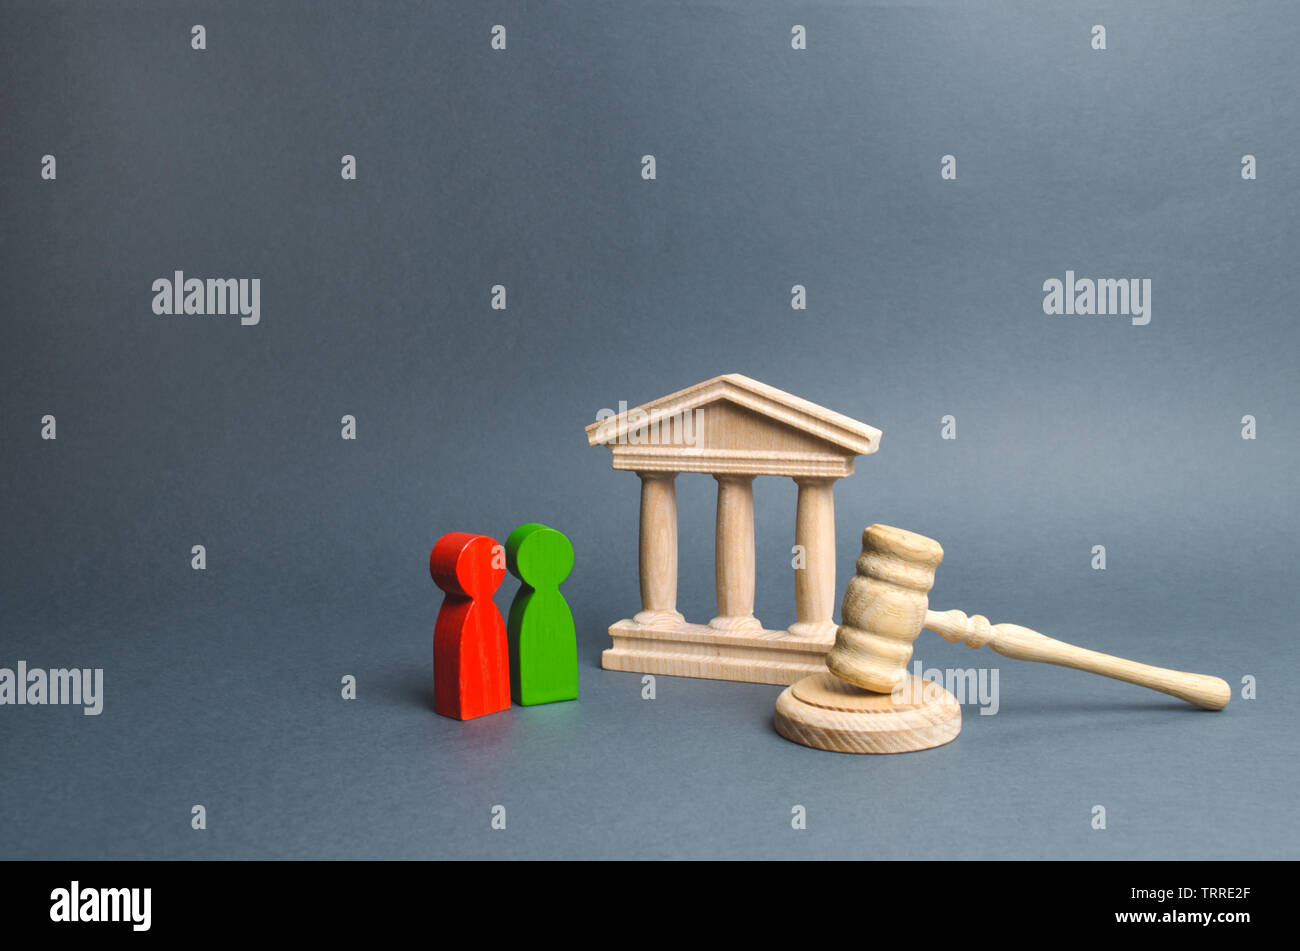 Two figures of people opponents stand near the courthouse and the judge's gavel. Conflict resolution in court, claimant and respondent. Court case, se Stock Photo